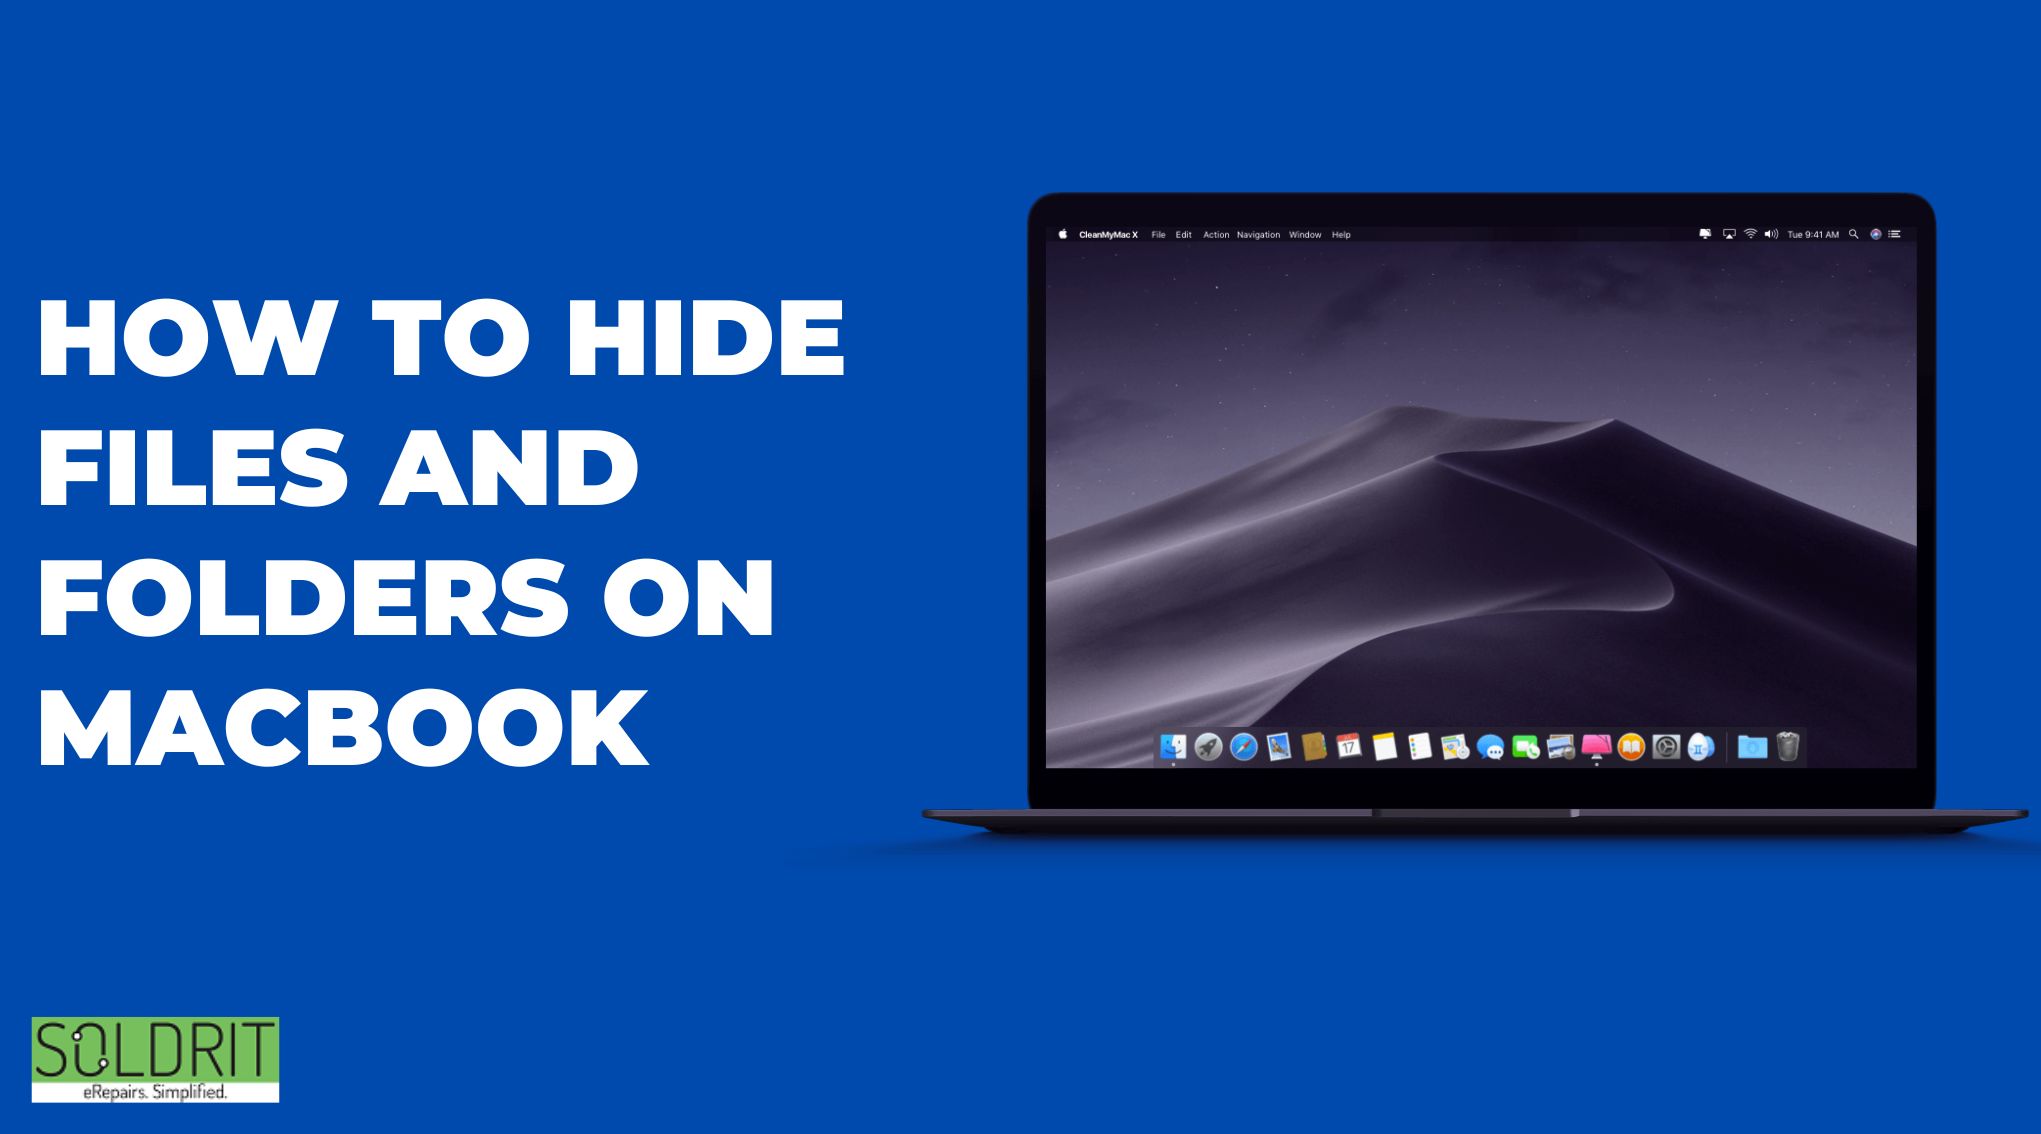 How to hide files and folders on Mac